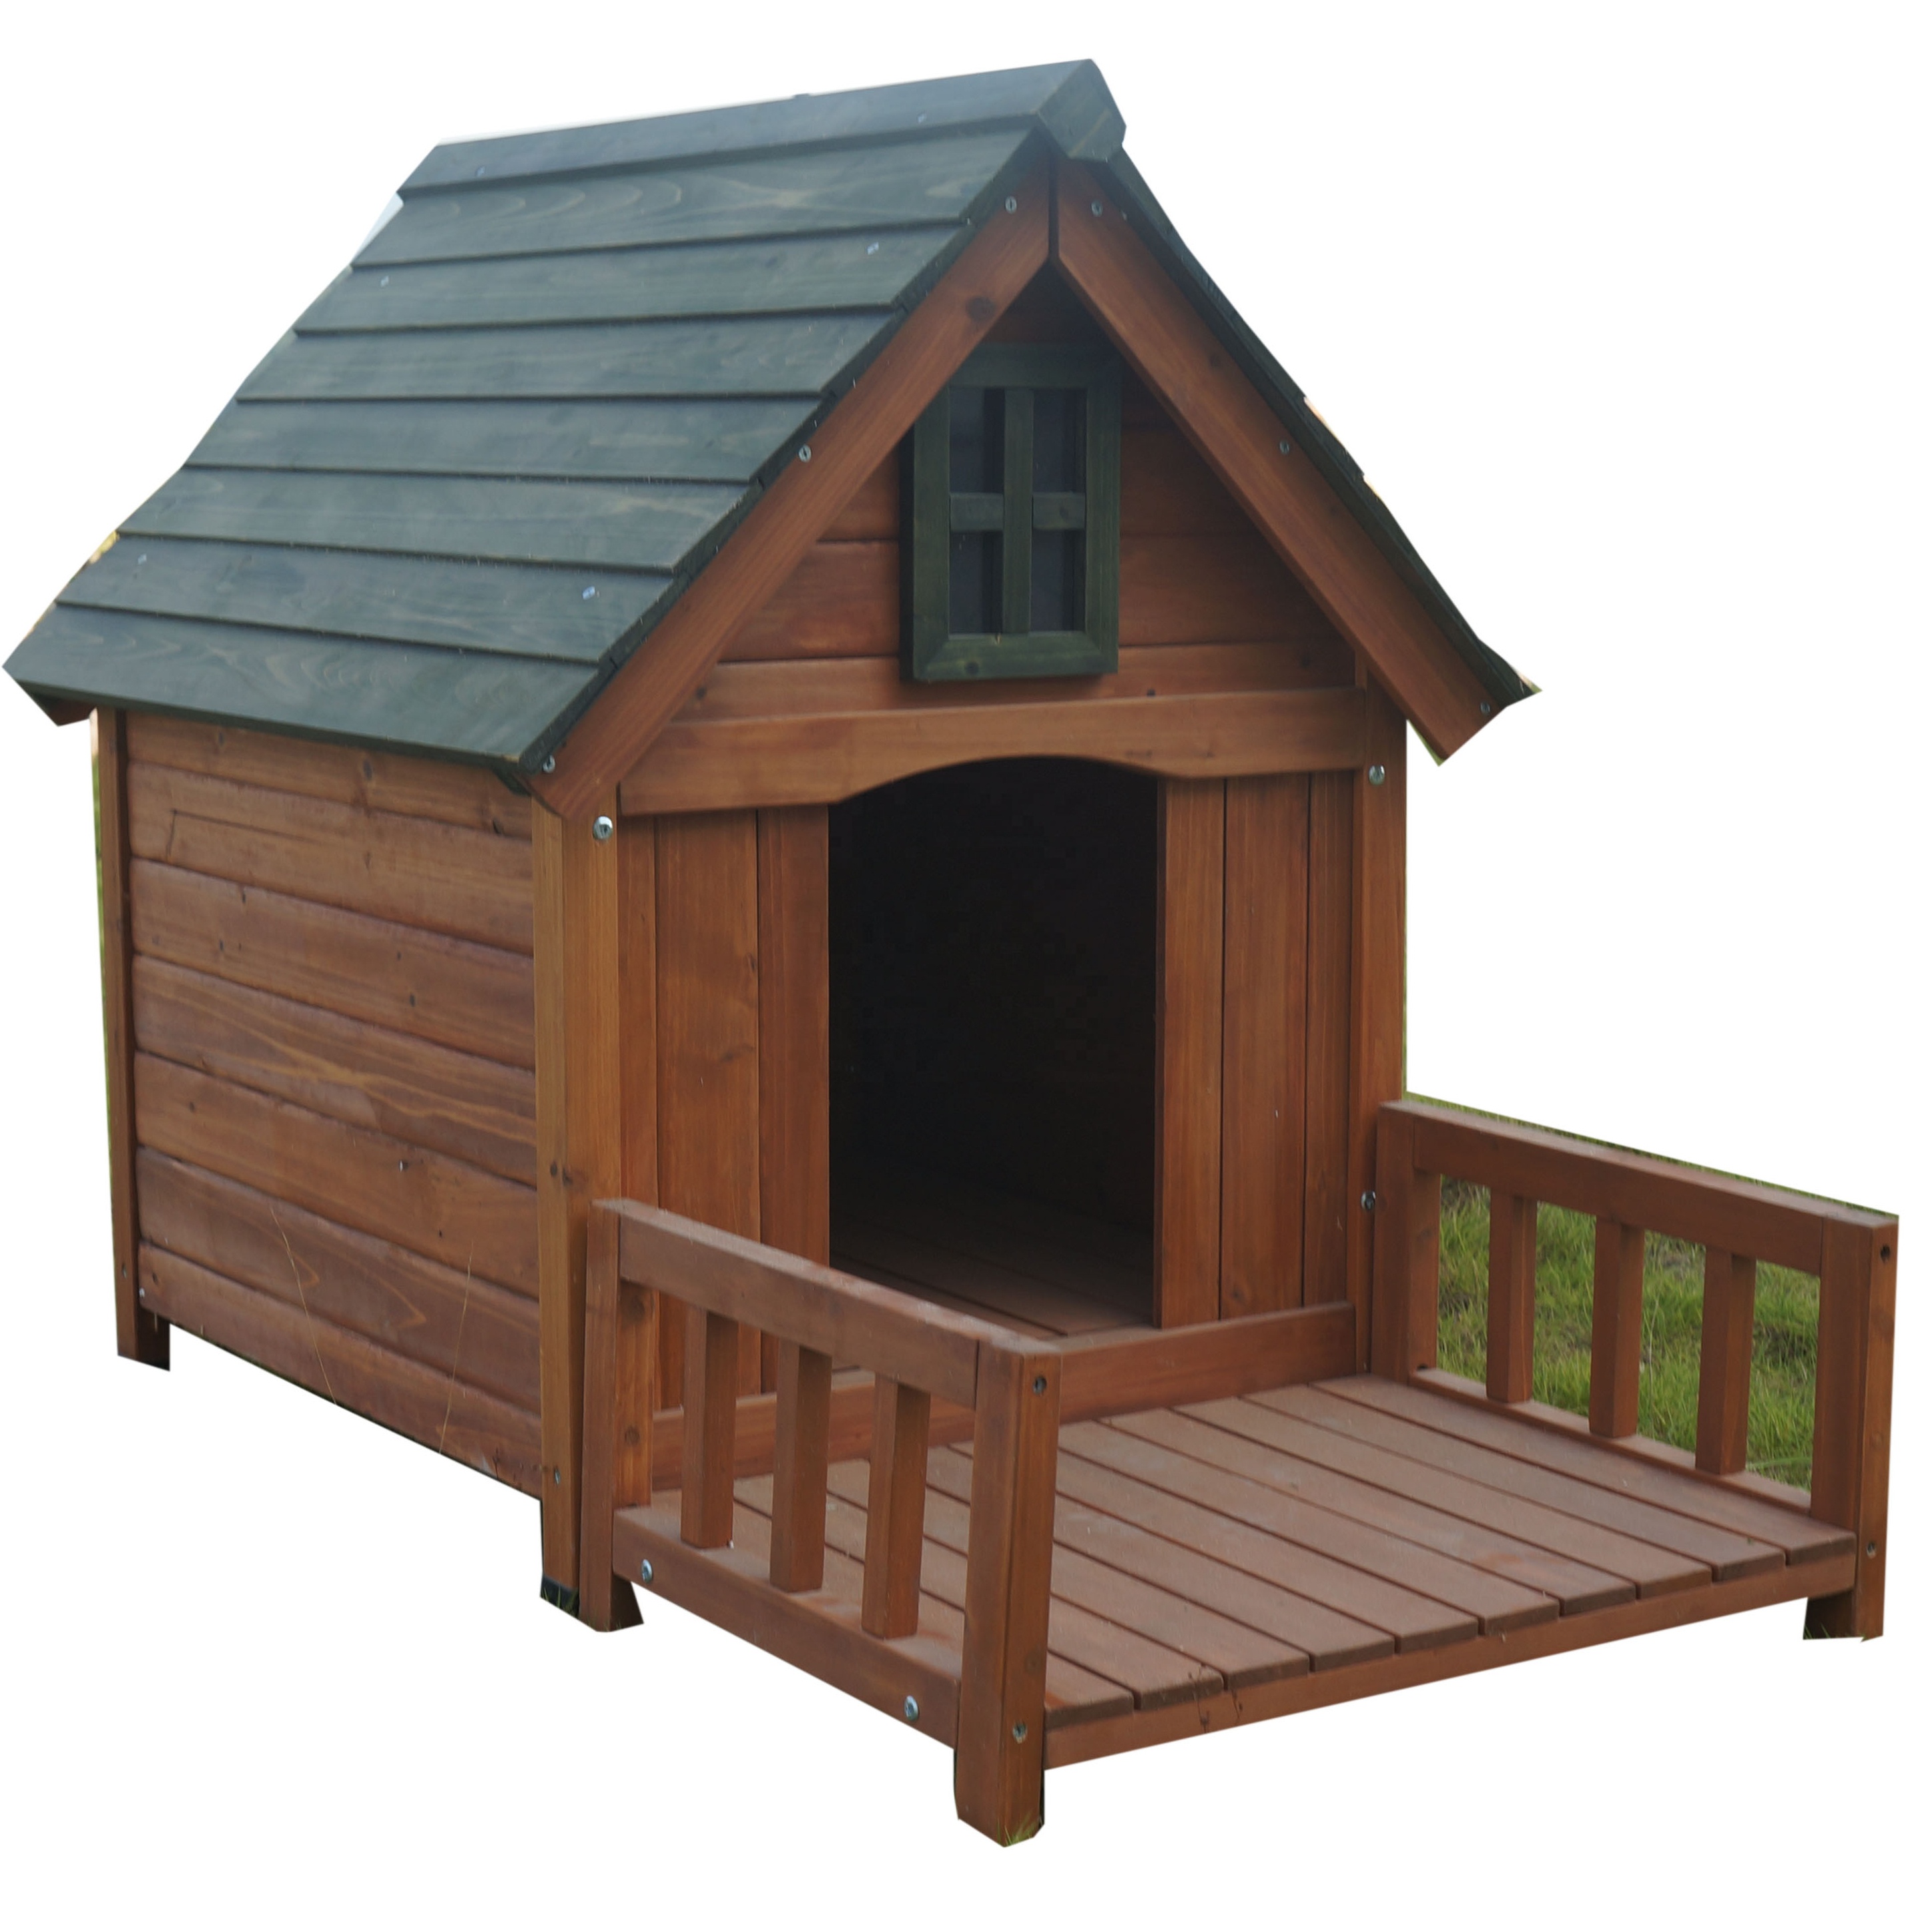 High quality wholesale big small outdoor wooden large windproof small wooden decorative dog house